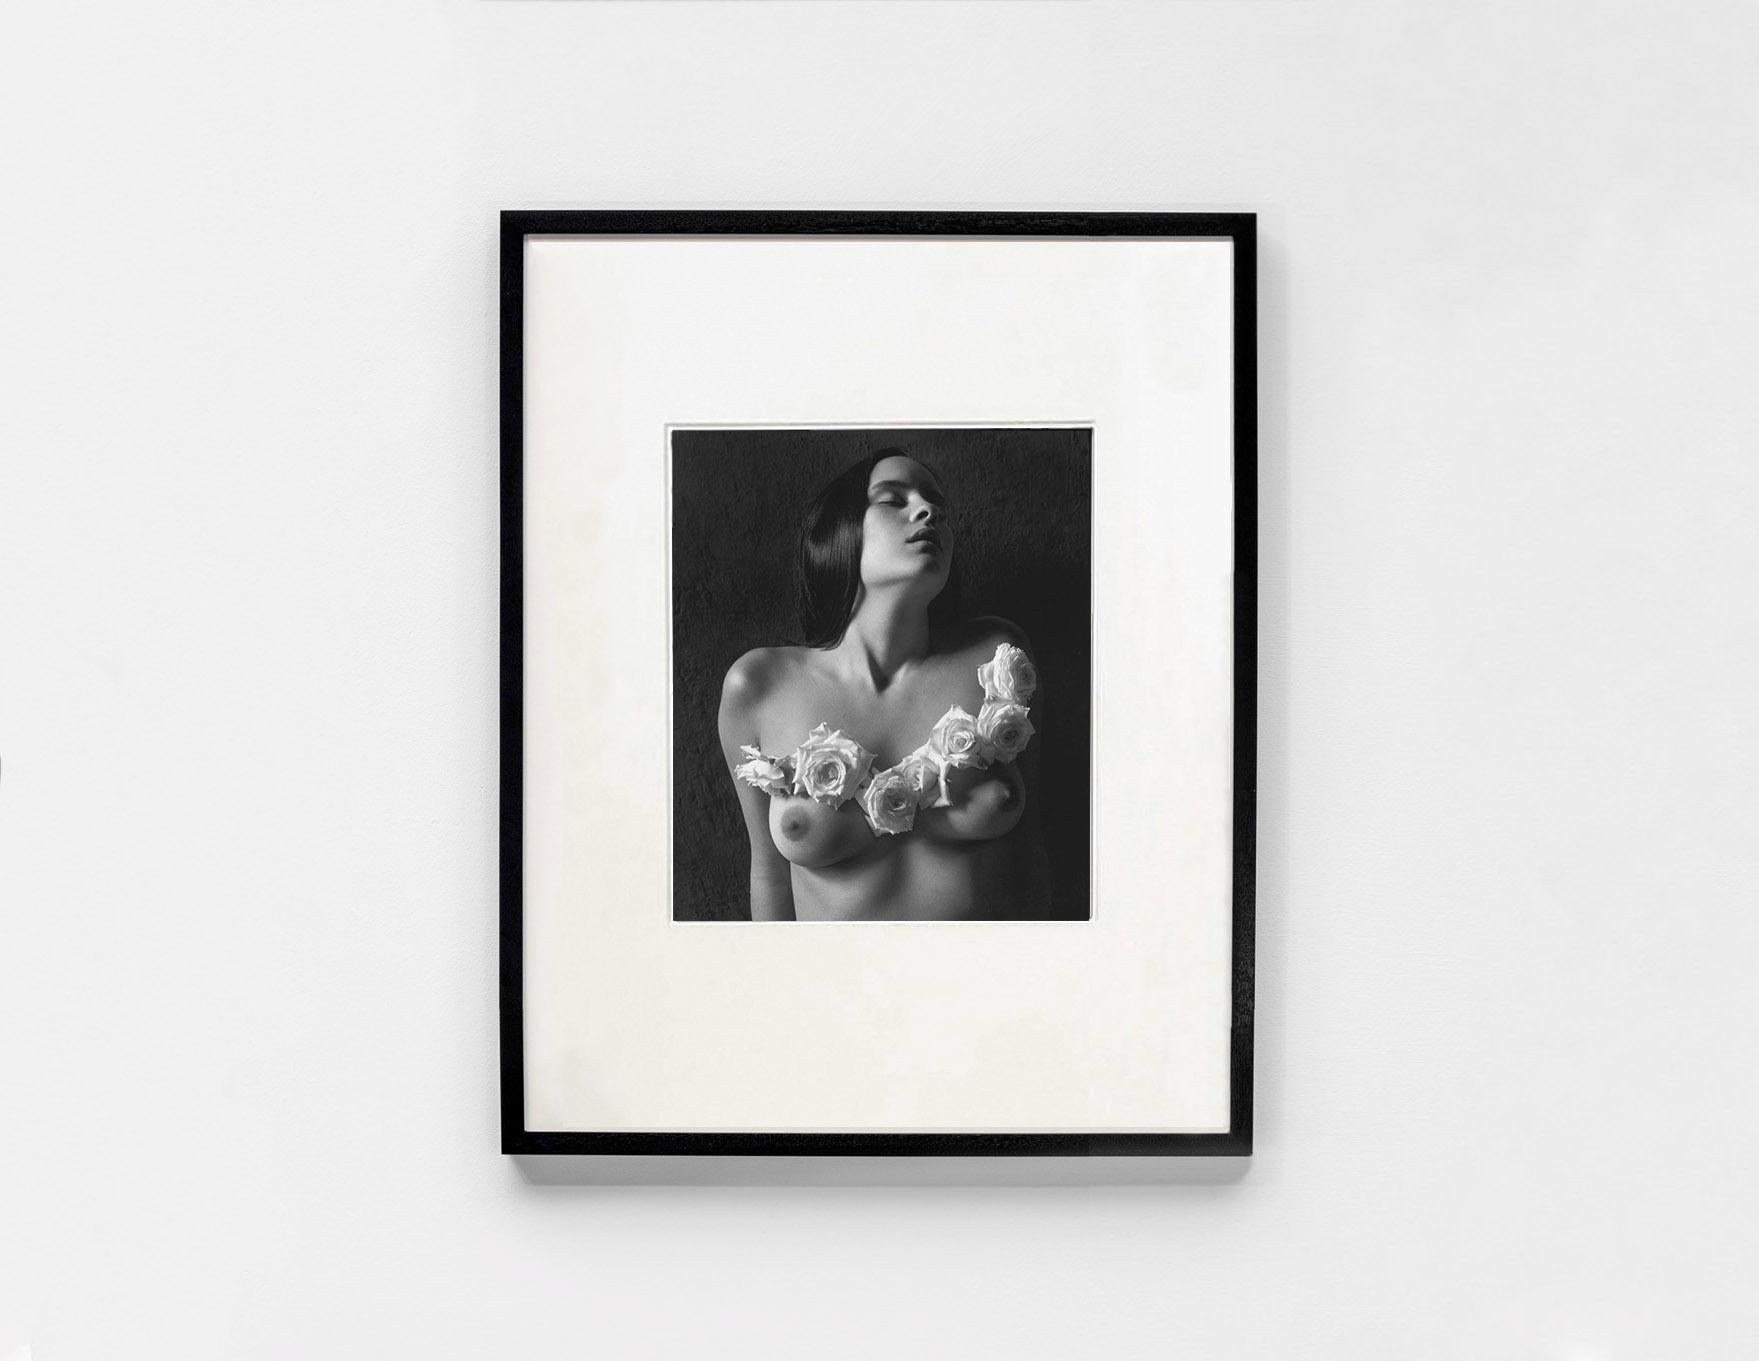 Signed
Silver gelatin print

Available in two sizes:
11 x 14 inches
16 x 20 inches

Also available as an editioned archival pigment print in two larger sizes and a platinum print, please enquire for details.

Flor Garduño (born 1957) is one of